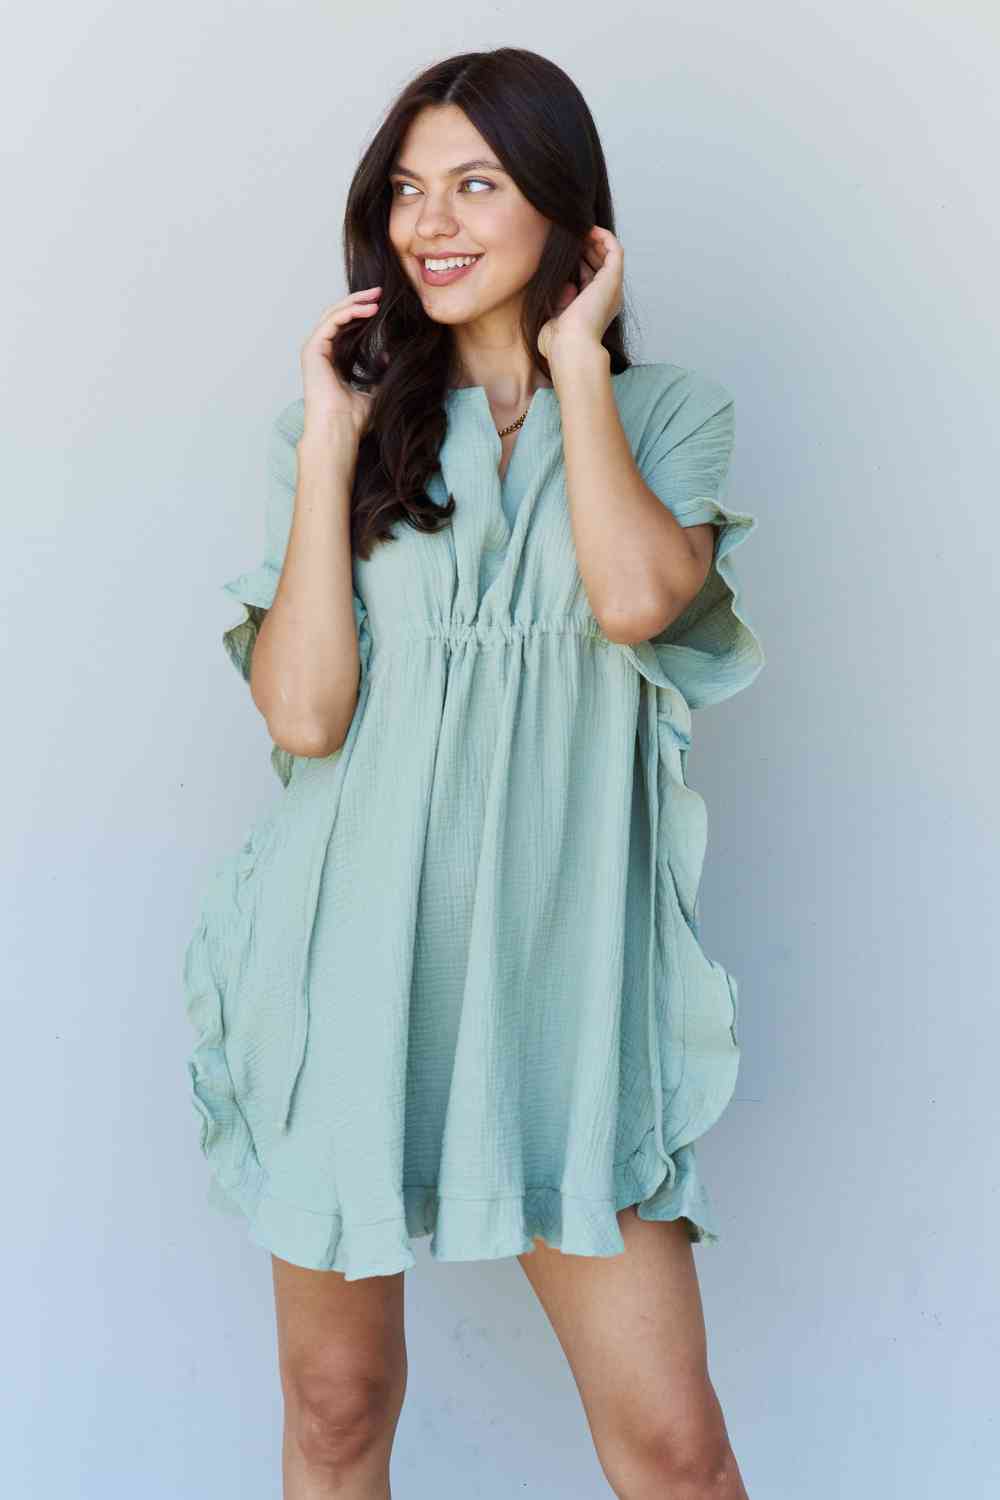 Ninexis Out Of Time Full Size Ruffle Hem Dress - Everyday-Sales.com